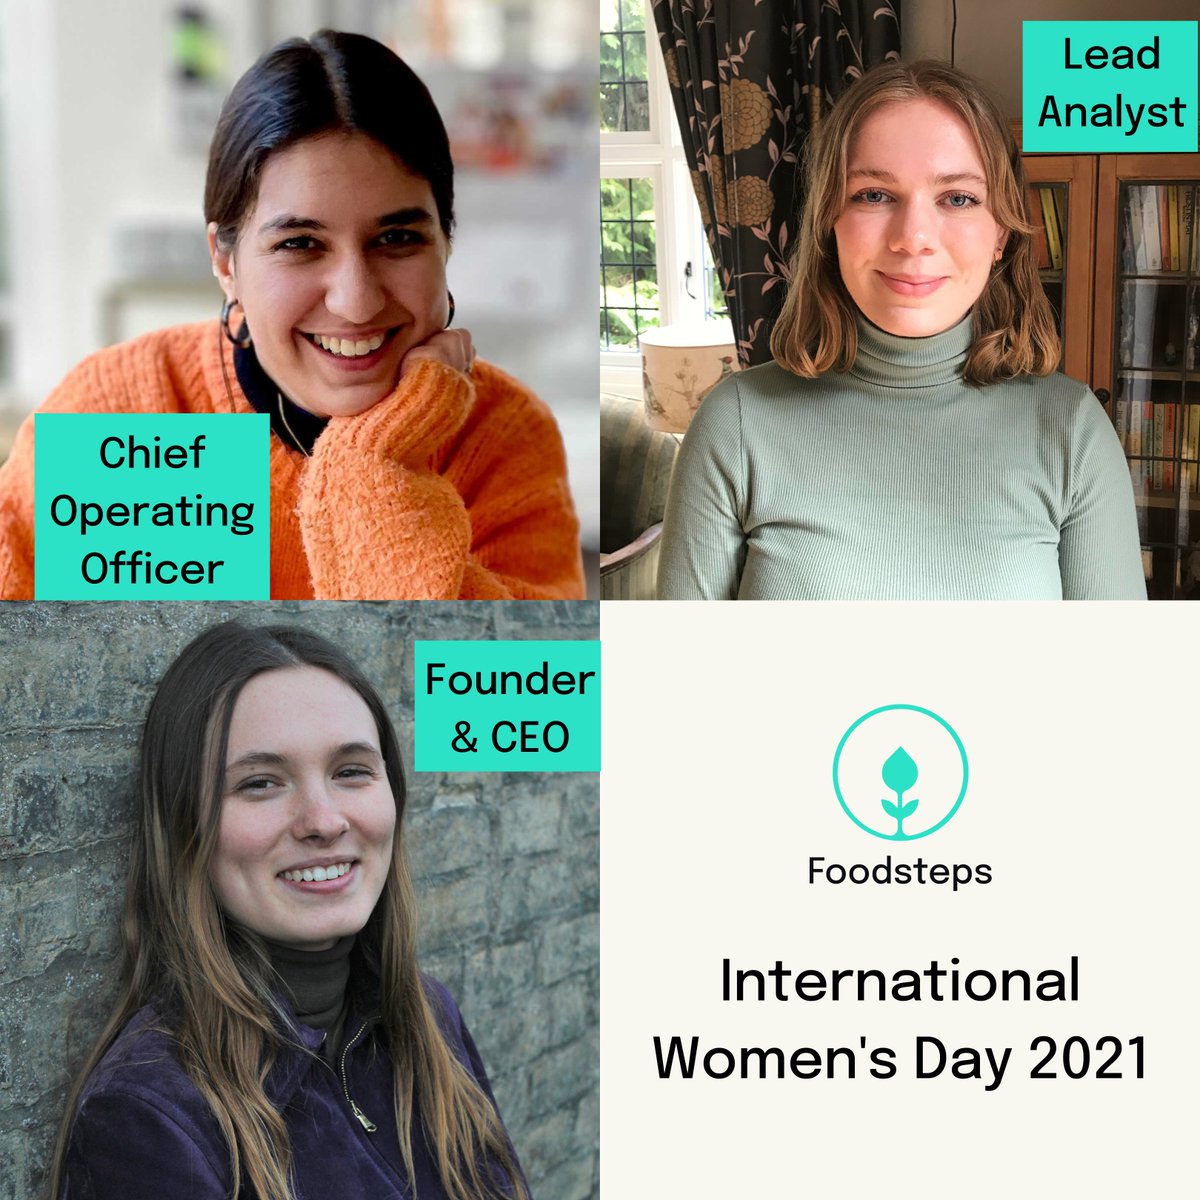 We're proud to be a business led by women! #InternationalWomensDay